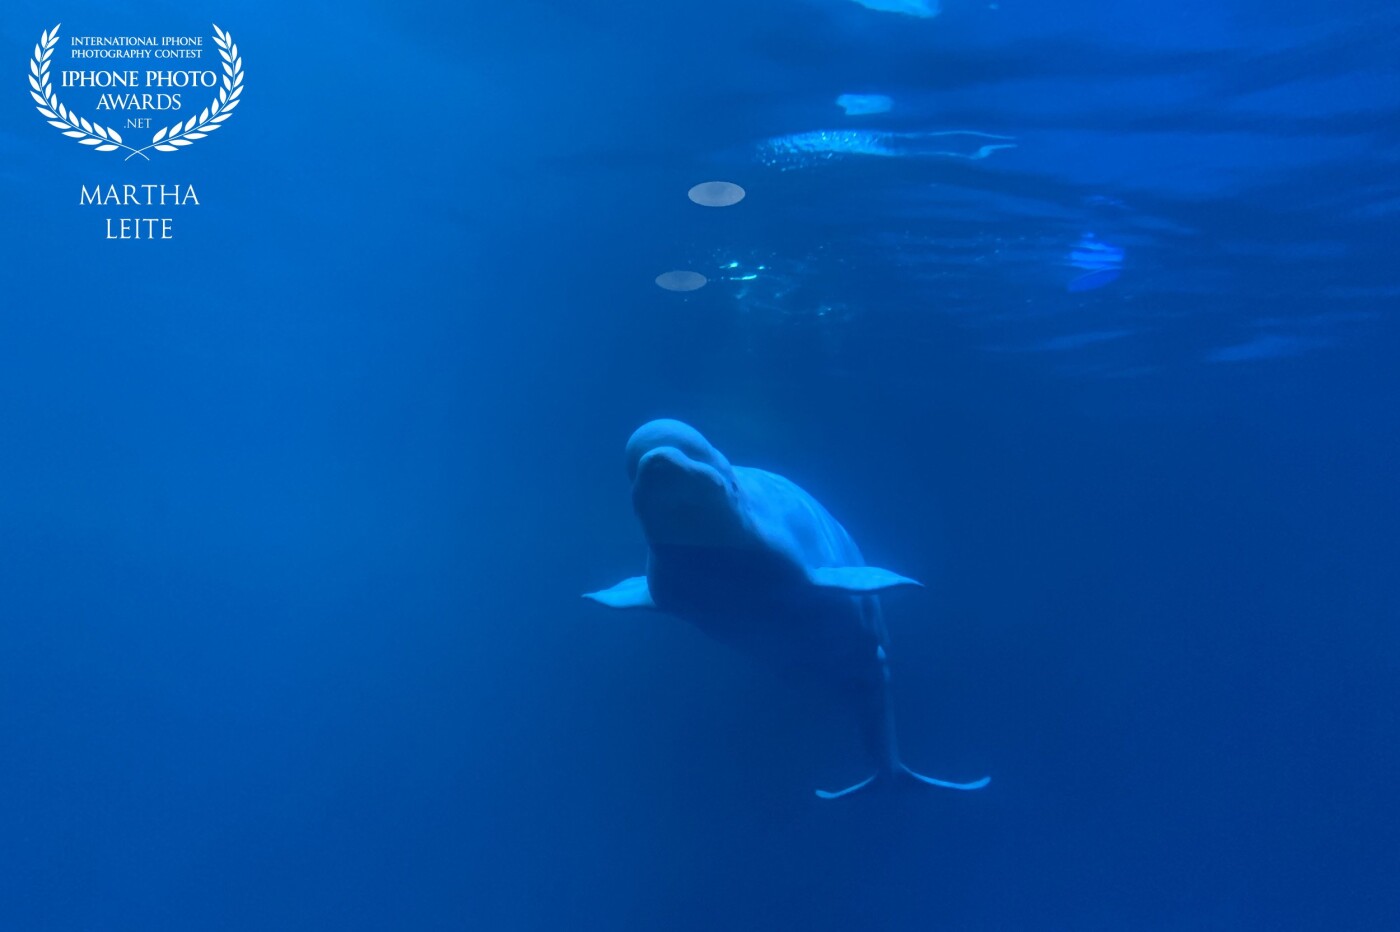 I had the opportunity to go to Chicago, Boston, DC and NY on my vacation and I wanted to go whale watching in Boston so bad... it wasn't possible because of the winter but I did go to see this gorgeous and peaceful beluga whale in Chicago. I could spend hours watching them.